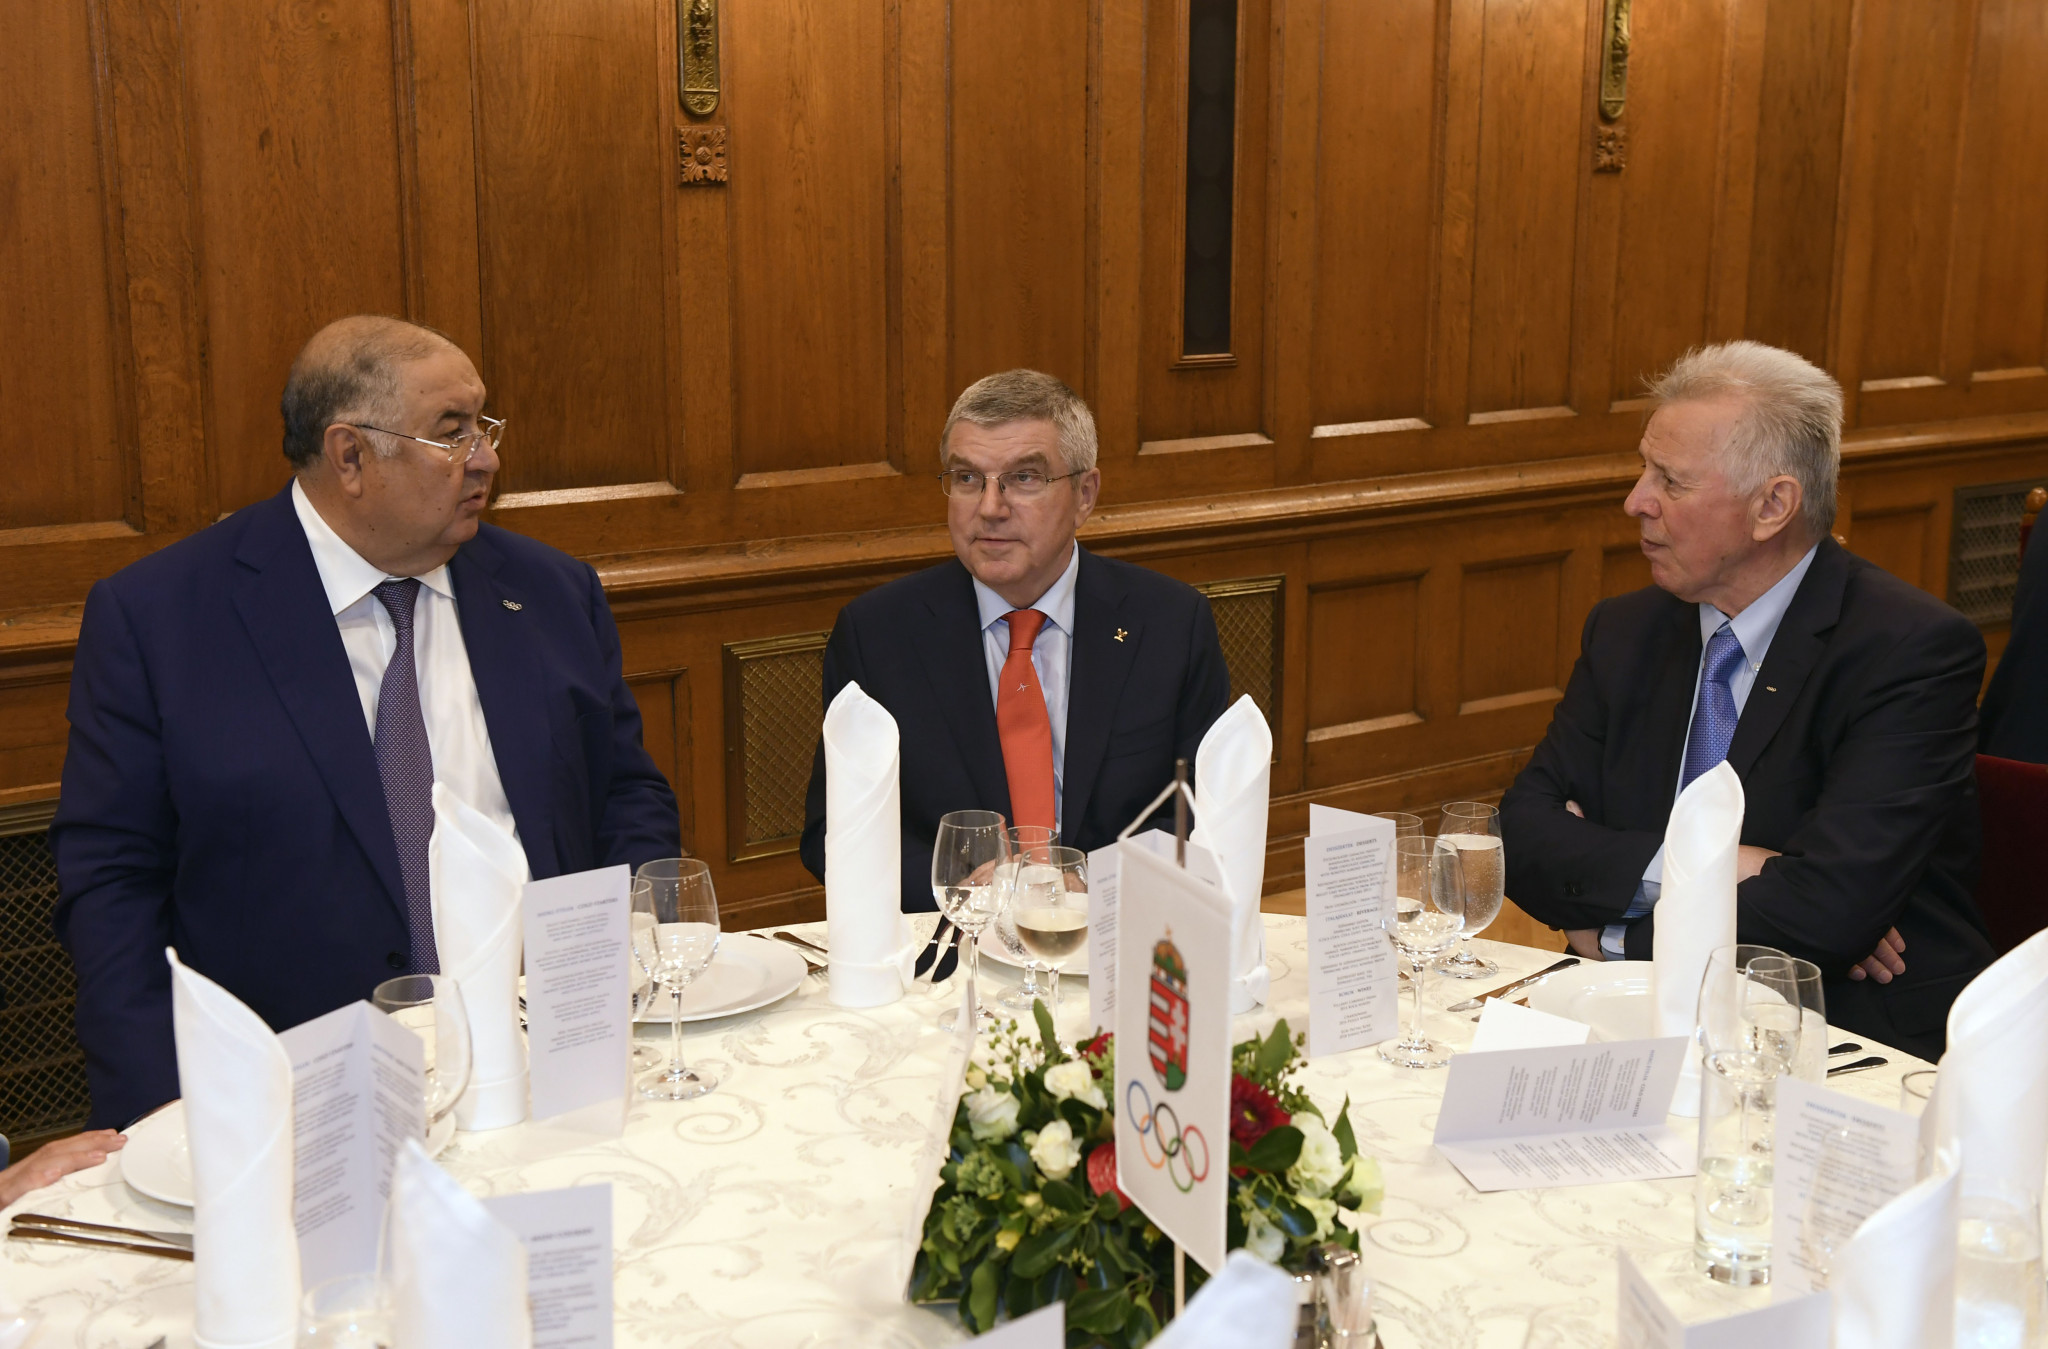 International Fencing Federation President Alisher Usmanov and Hungarian IOC member Pál Schmitt joined Thomas Bach at the reception ©MOB